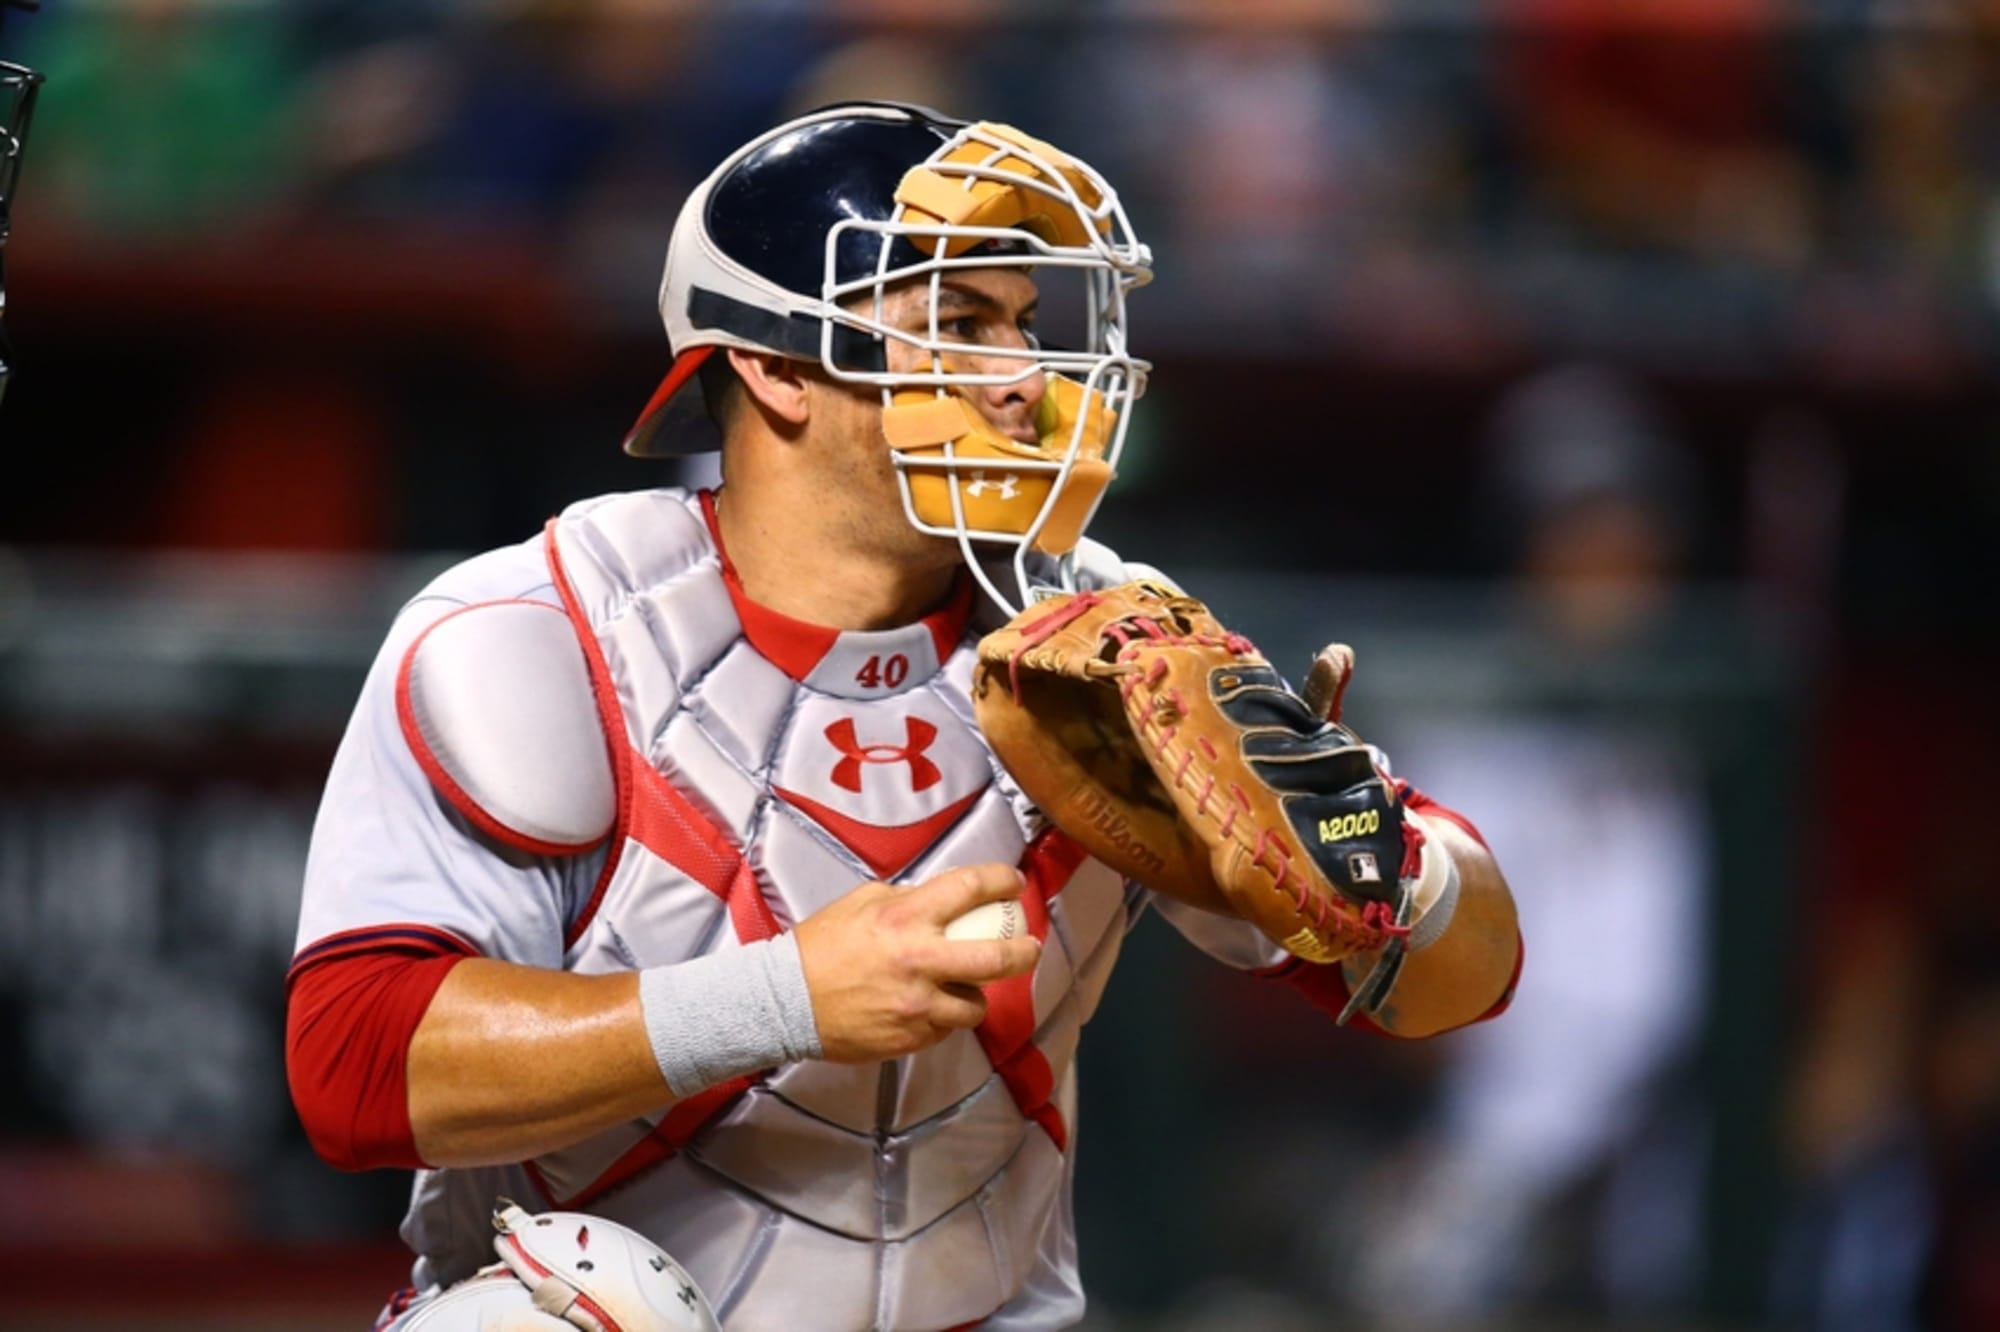 Yadier Molina wore some pretty nifty catching gear in the All-Star Game